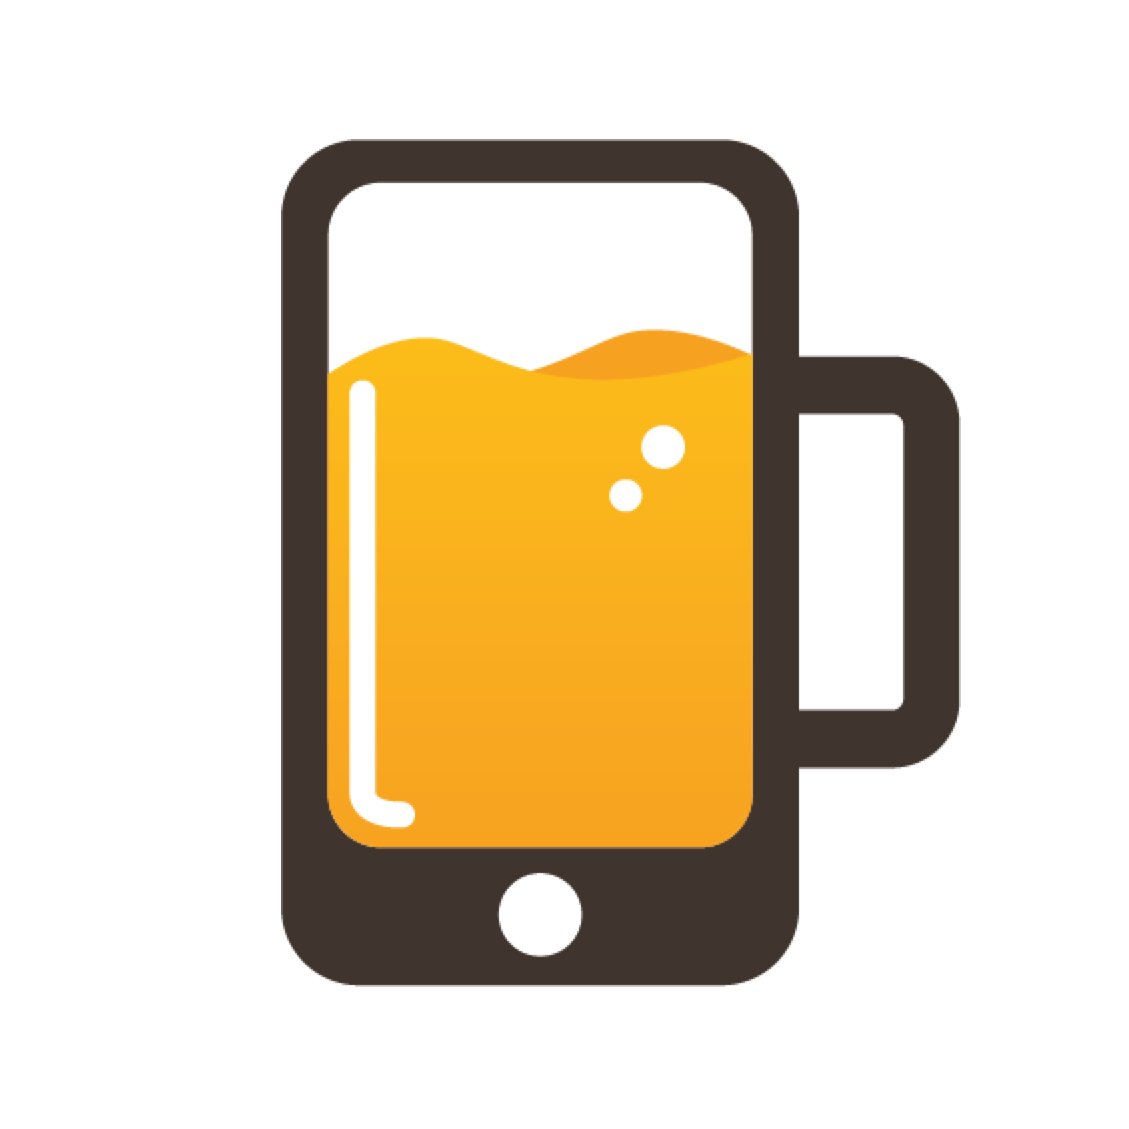 Send a beer...to anyone...anywhere…immediately!
The BeerYou app will deliver a beer immediately to your friend, colleague, customer, or other beer lover.